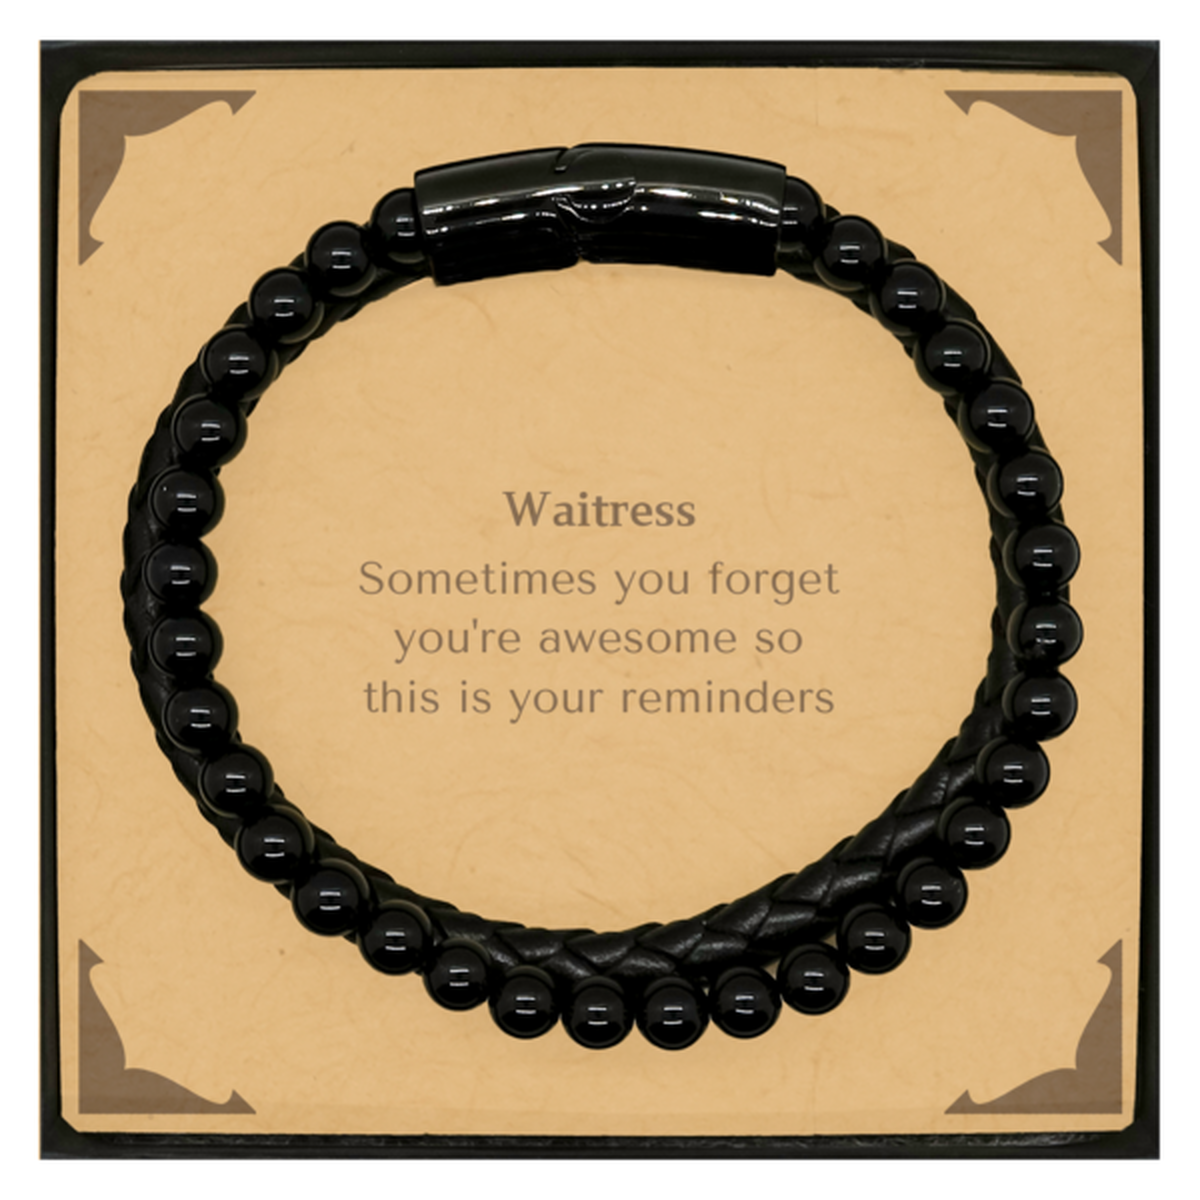 Sentimental Waitress Stone Leather Bracelets, Waitress Sometimes you forget you're awesome so this is your reminders, Graduation Christmas Birthday Gifts for Waitress, Men, Women, Coworkers